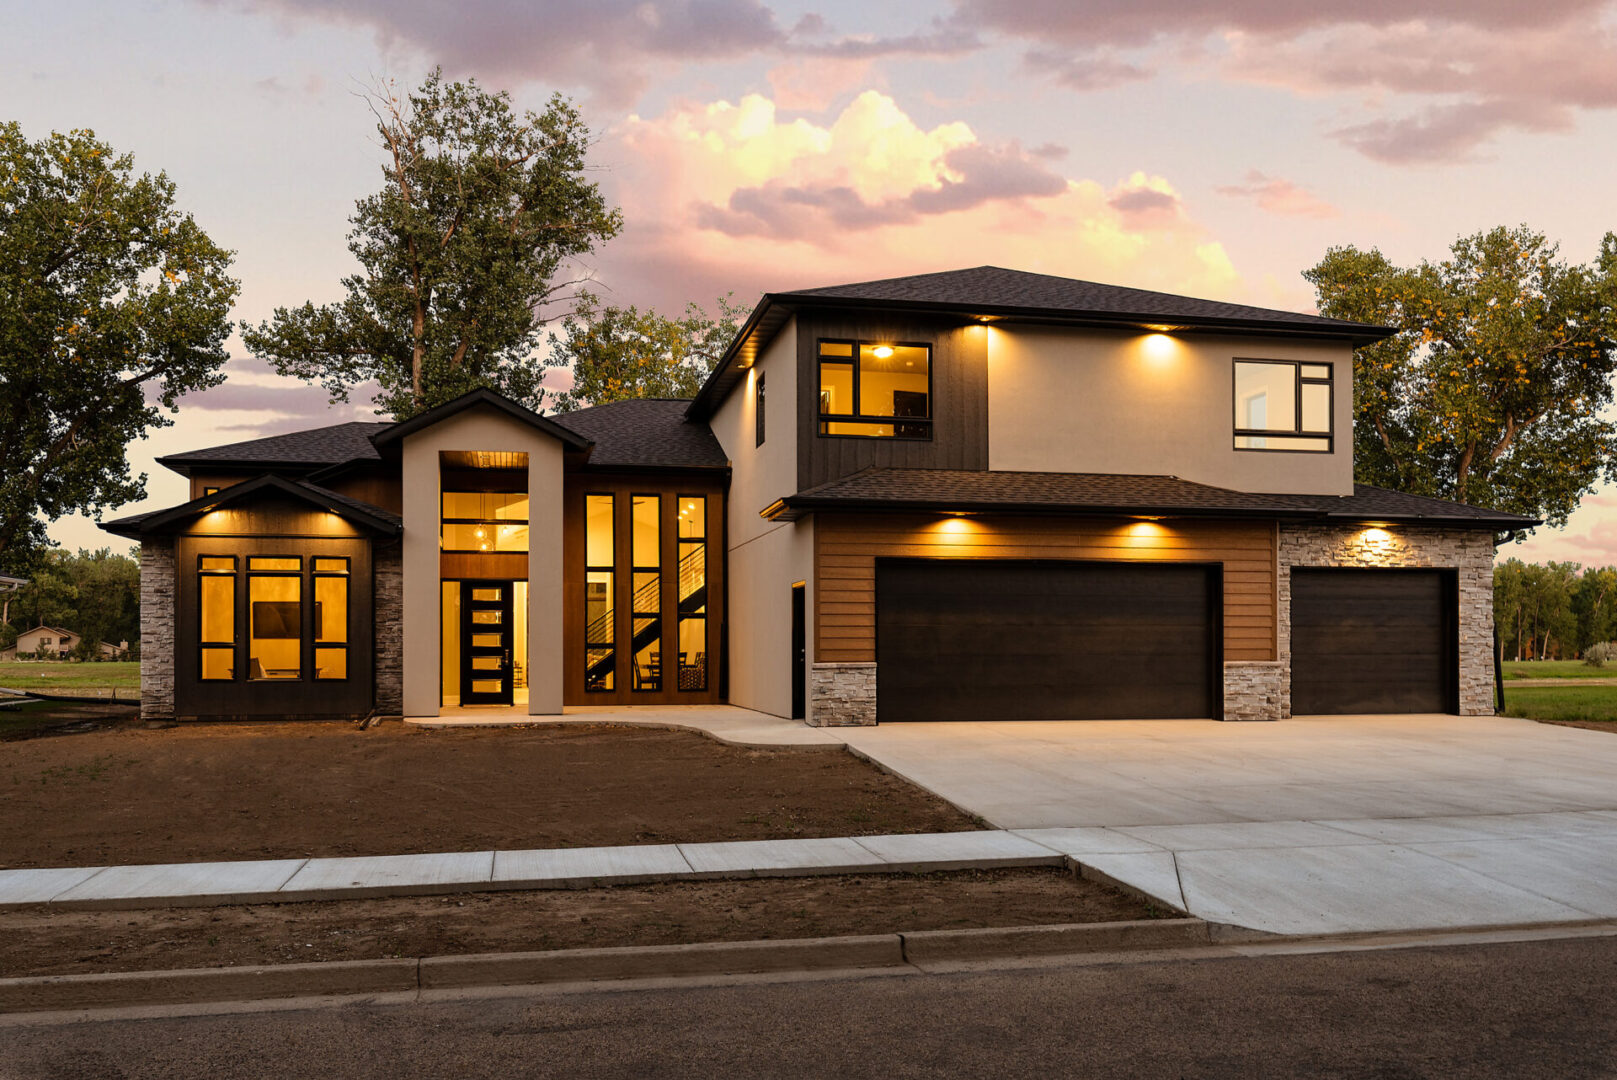 A large modern home with a driveway and garage.